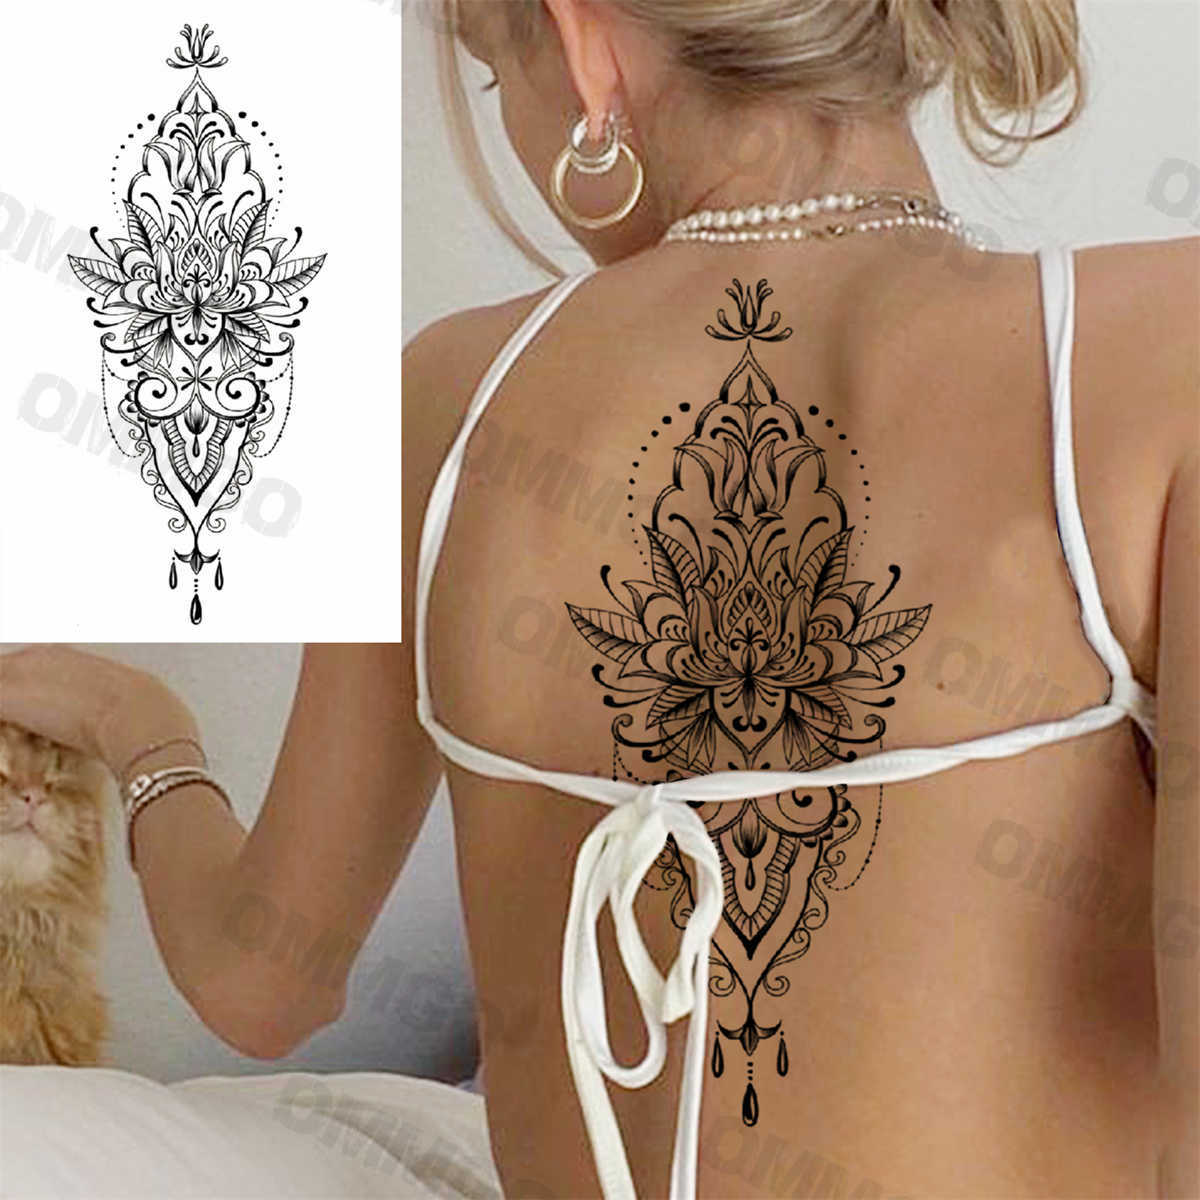 Temporary Tattoos Realistic Butterfly Pendant Sexy Back Temporary Tattoos For Women Adult Moon Lotus Fake Tattoo Body Art Painting Tatoos Sticker Z0403